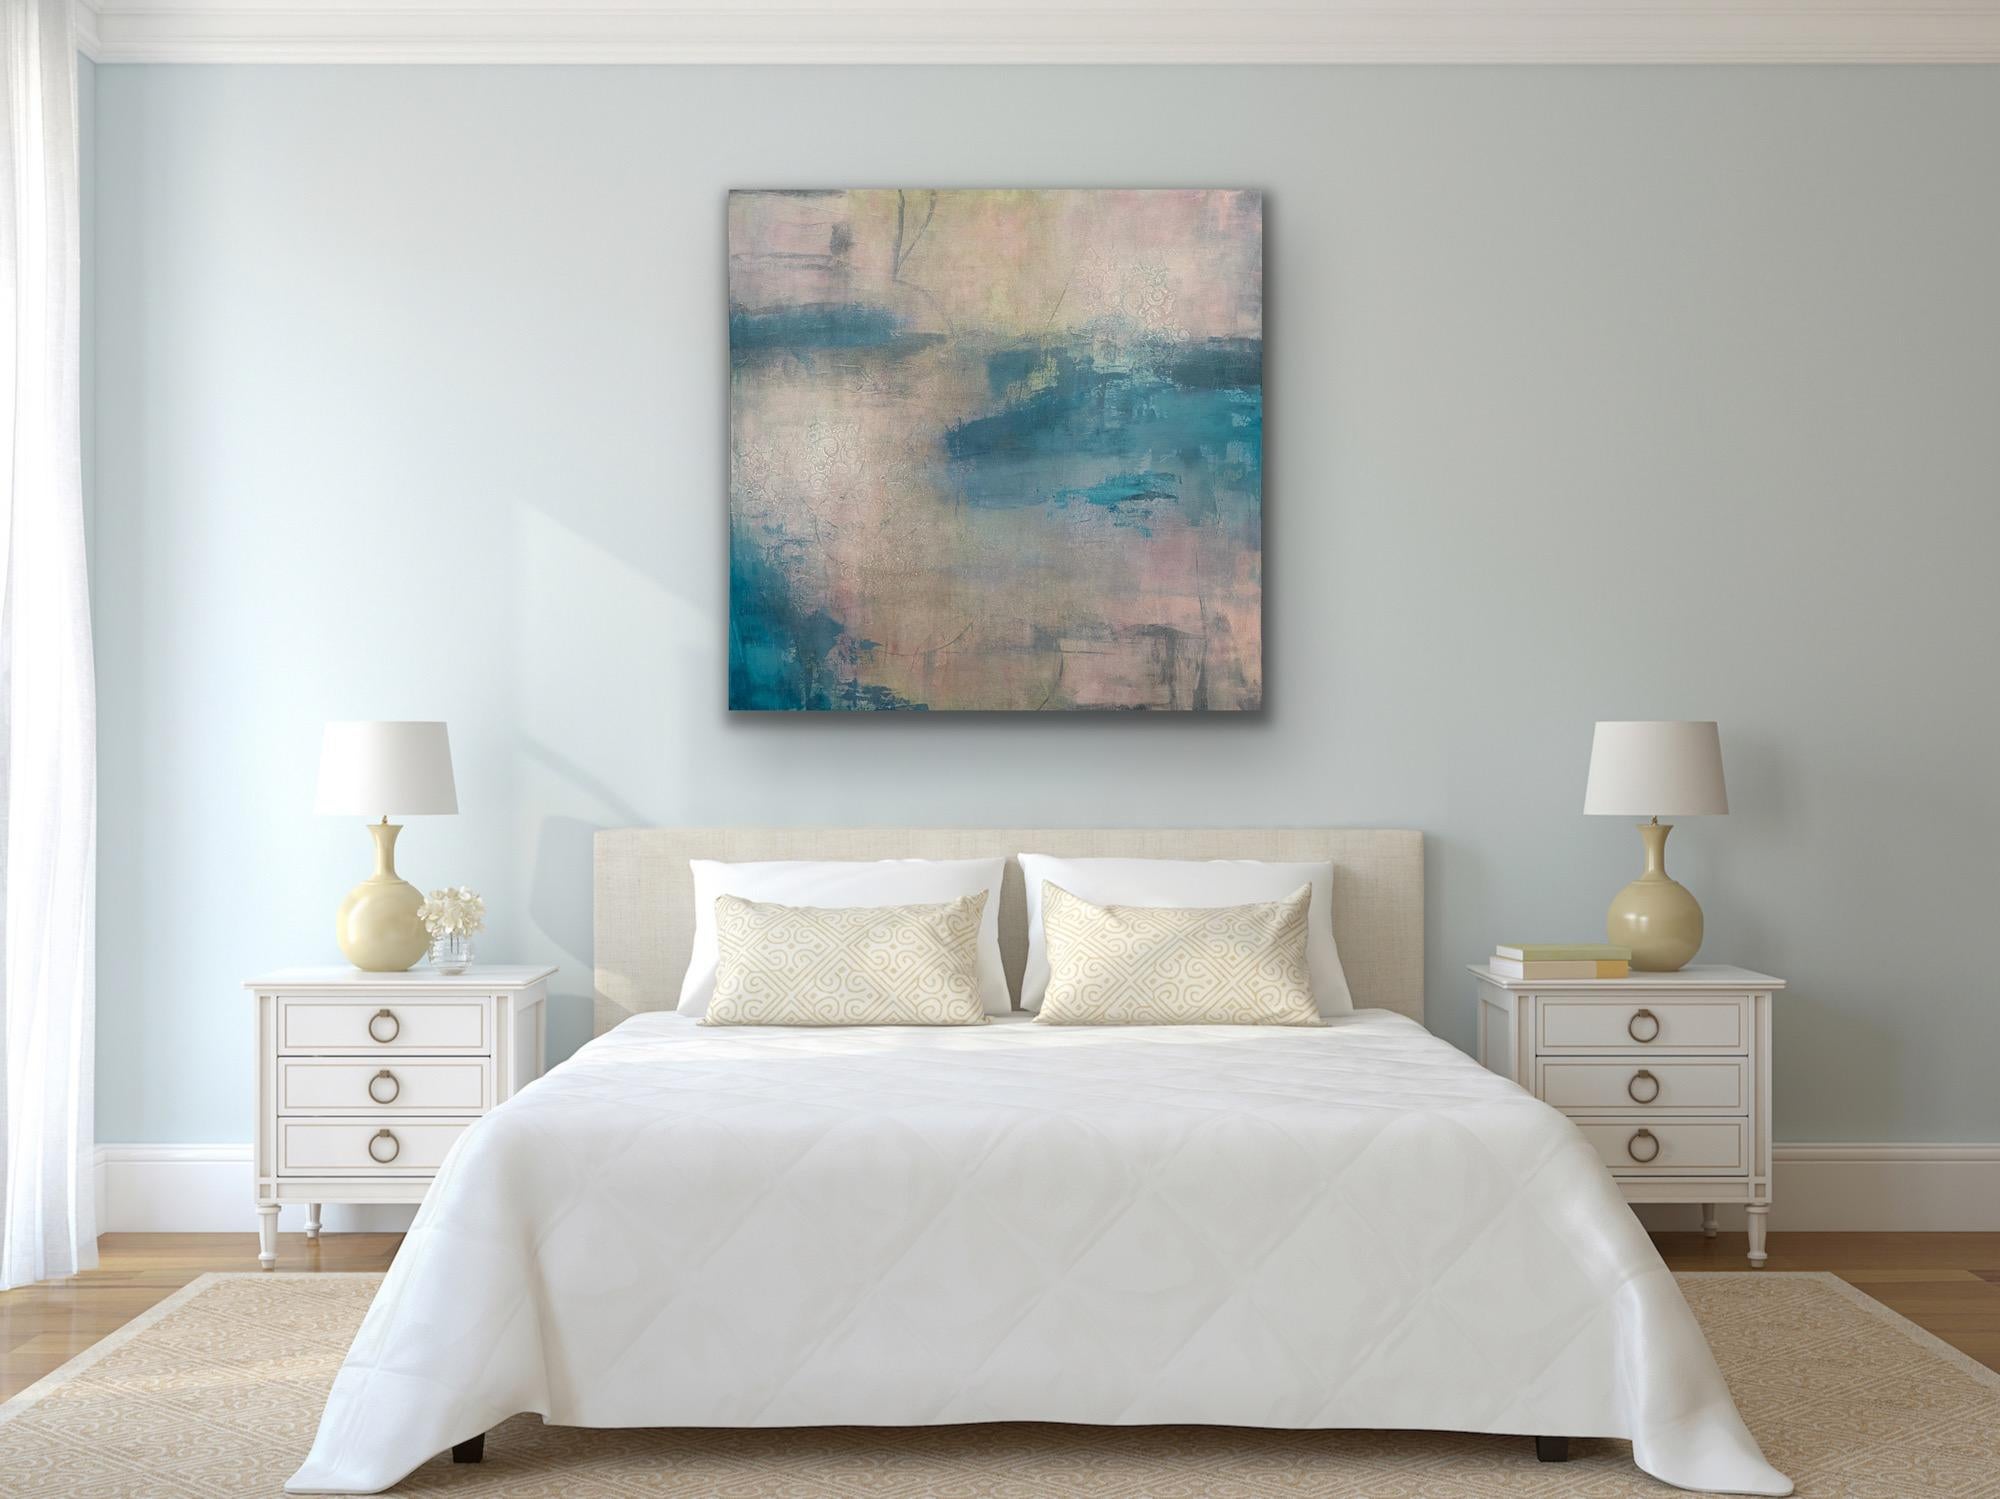 Sunrise on the bay, Contemporary seascape, blue, pink, reflective, asian flair For Sale 11